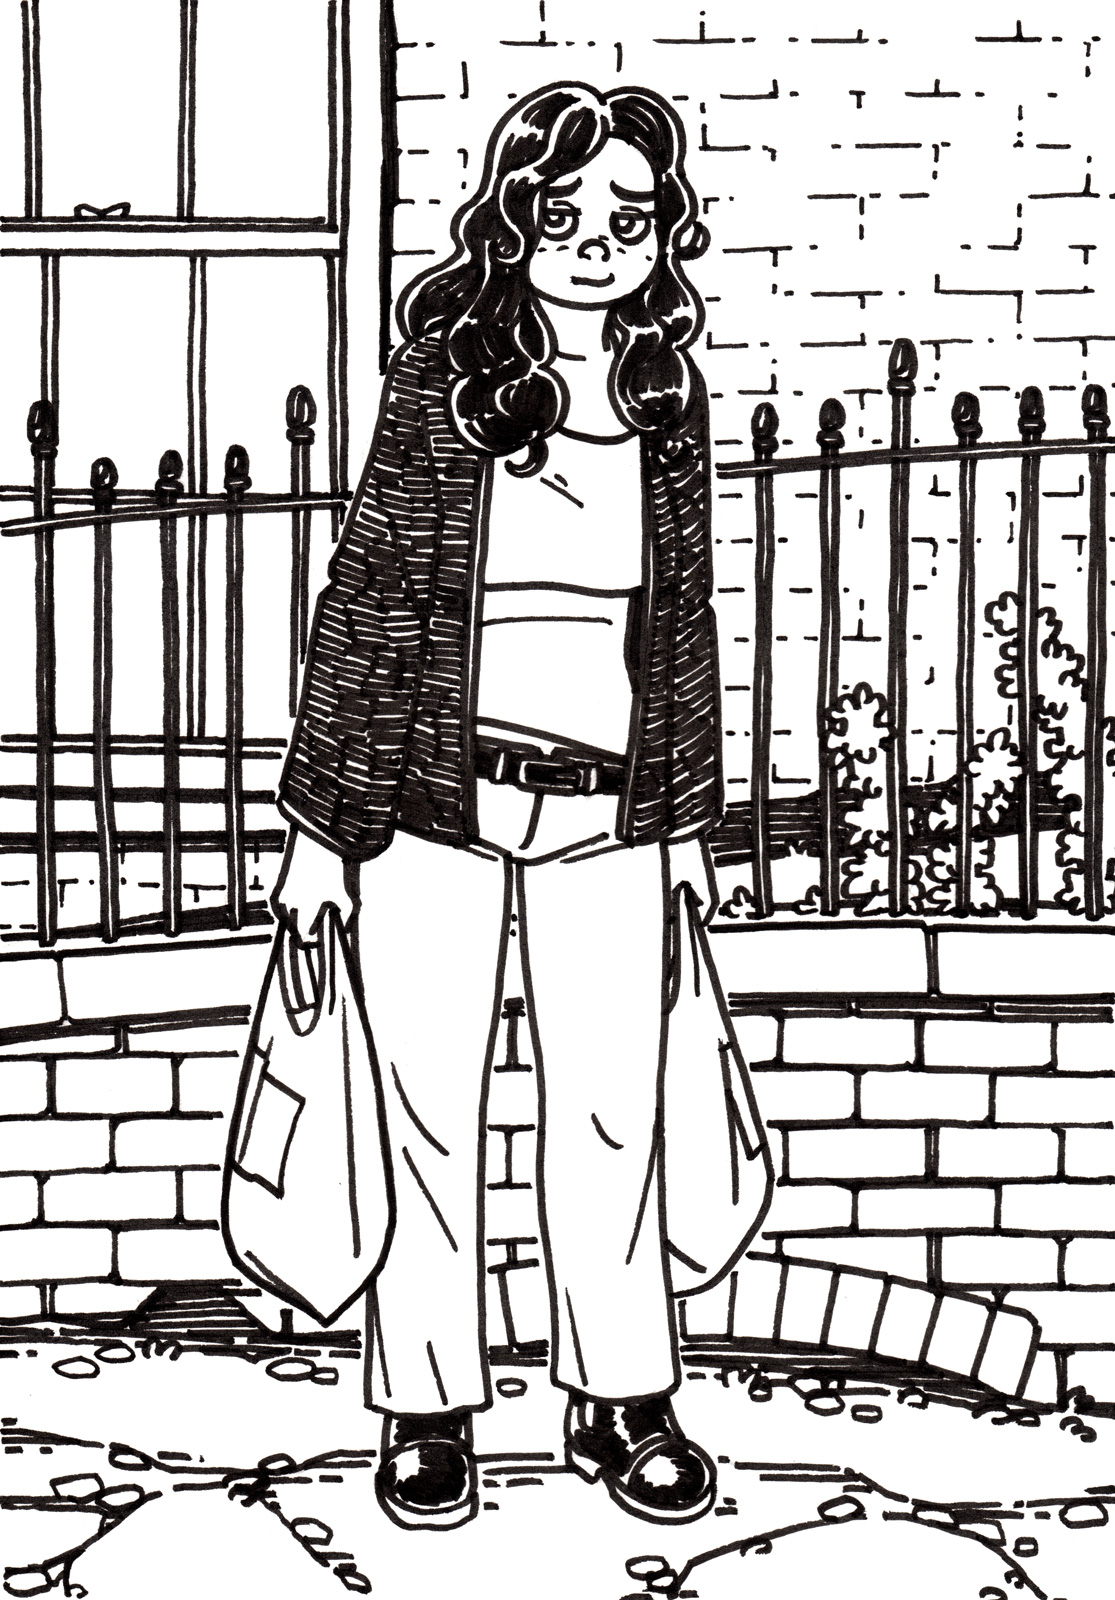 A tired girl slouching with a shopping bag in each hand, standing on a path in front of an old fence and rough brick wall.